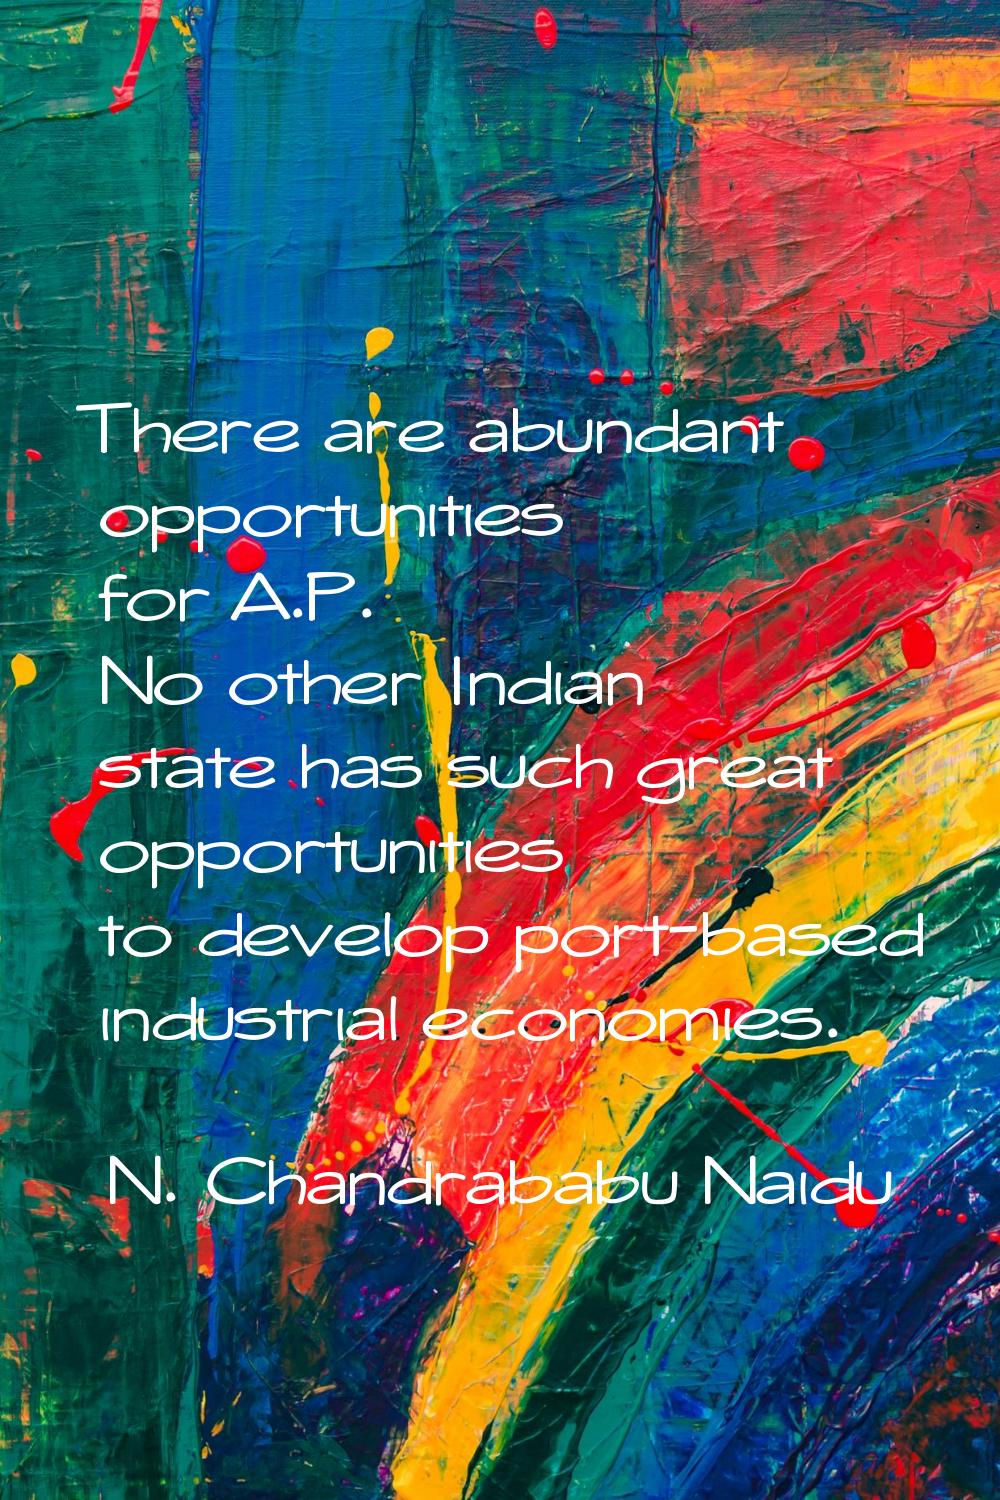 There are abundant opportunities for A.P. No other Indian state has such great opportunities to dev